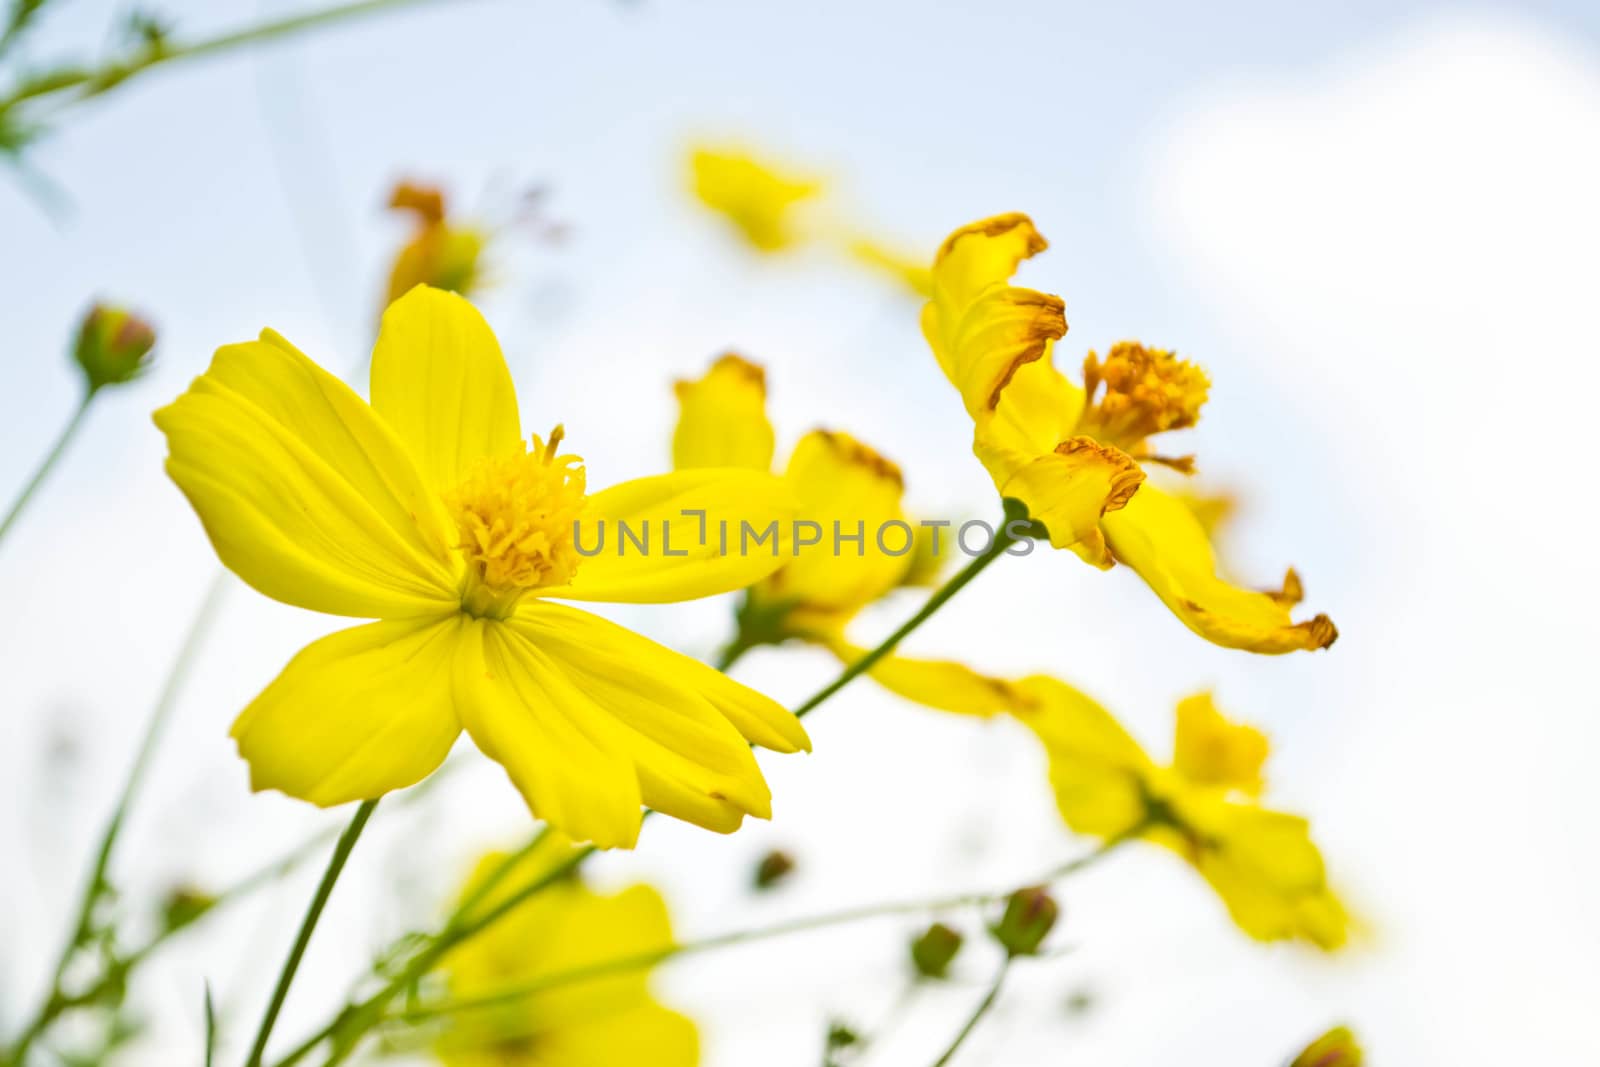 Yellow flowers on blue sky 